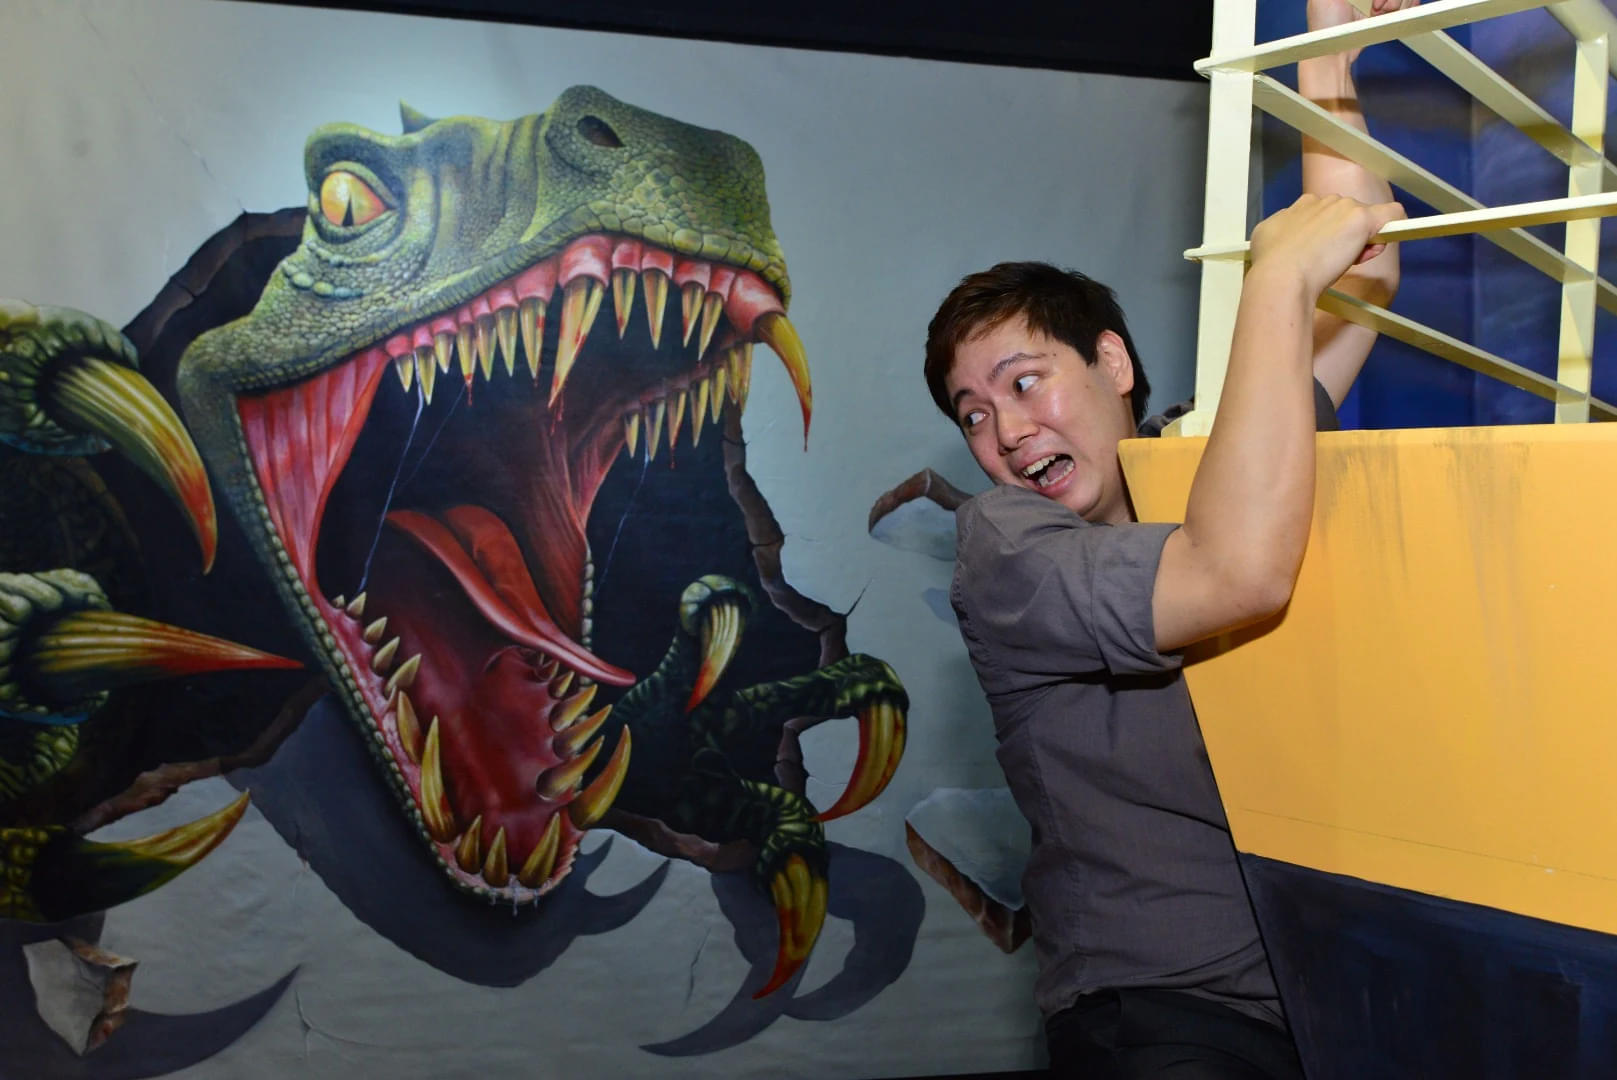 Battle the monstrous dragons and have a thrilling adventure in the museum